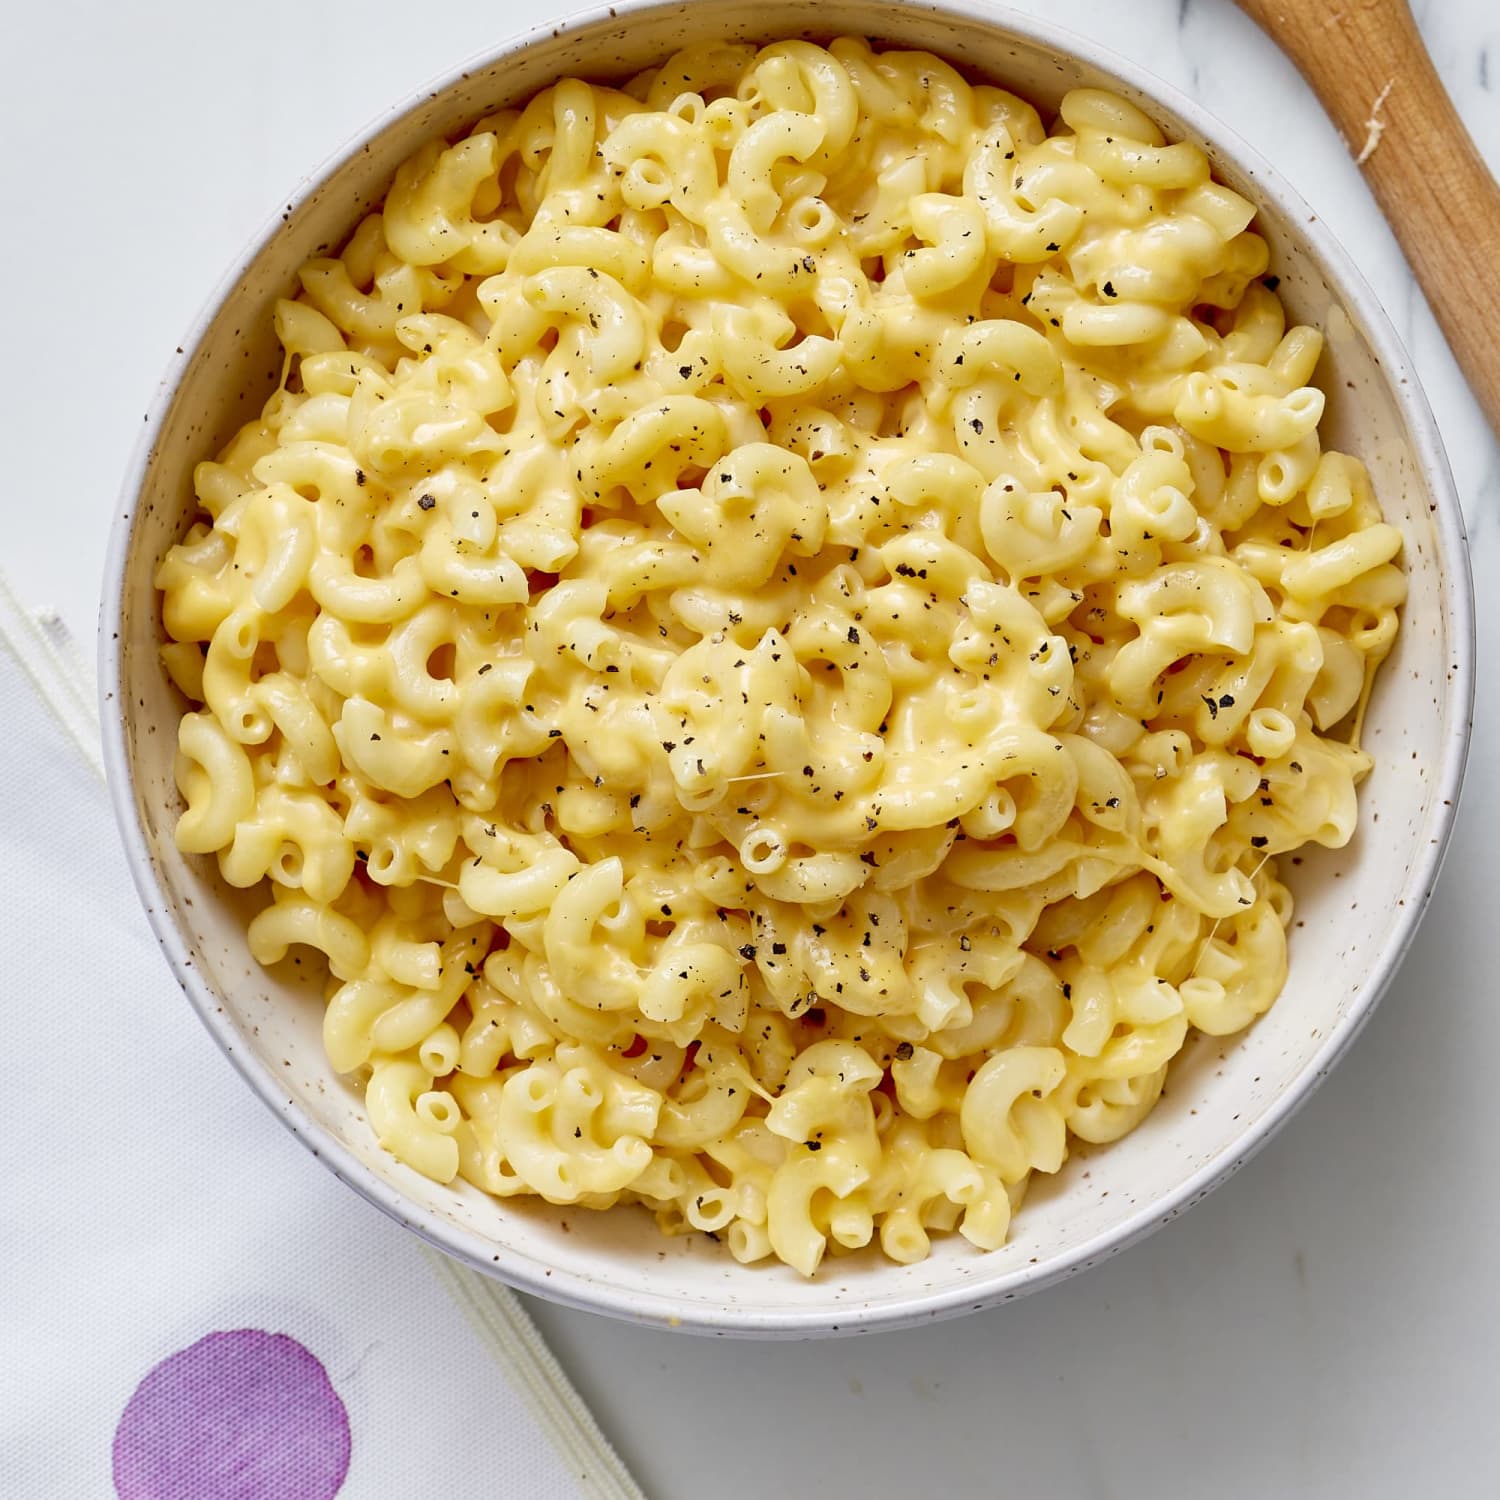 How To Make Mac And Cheese - Easy Stovetop Recipe | Kitchn